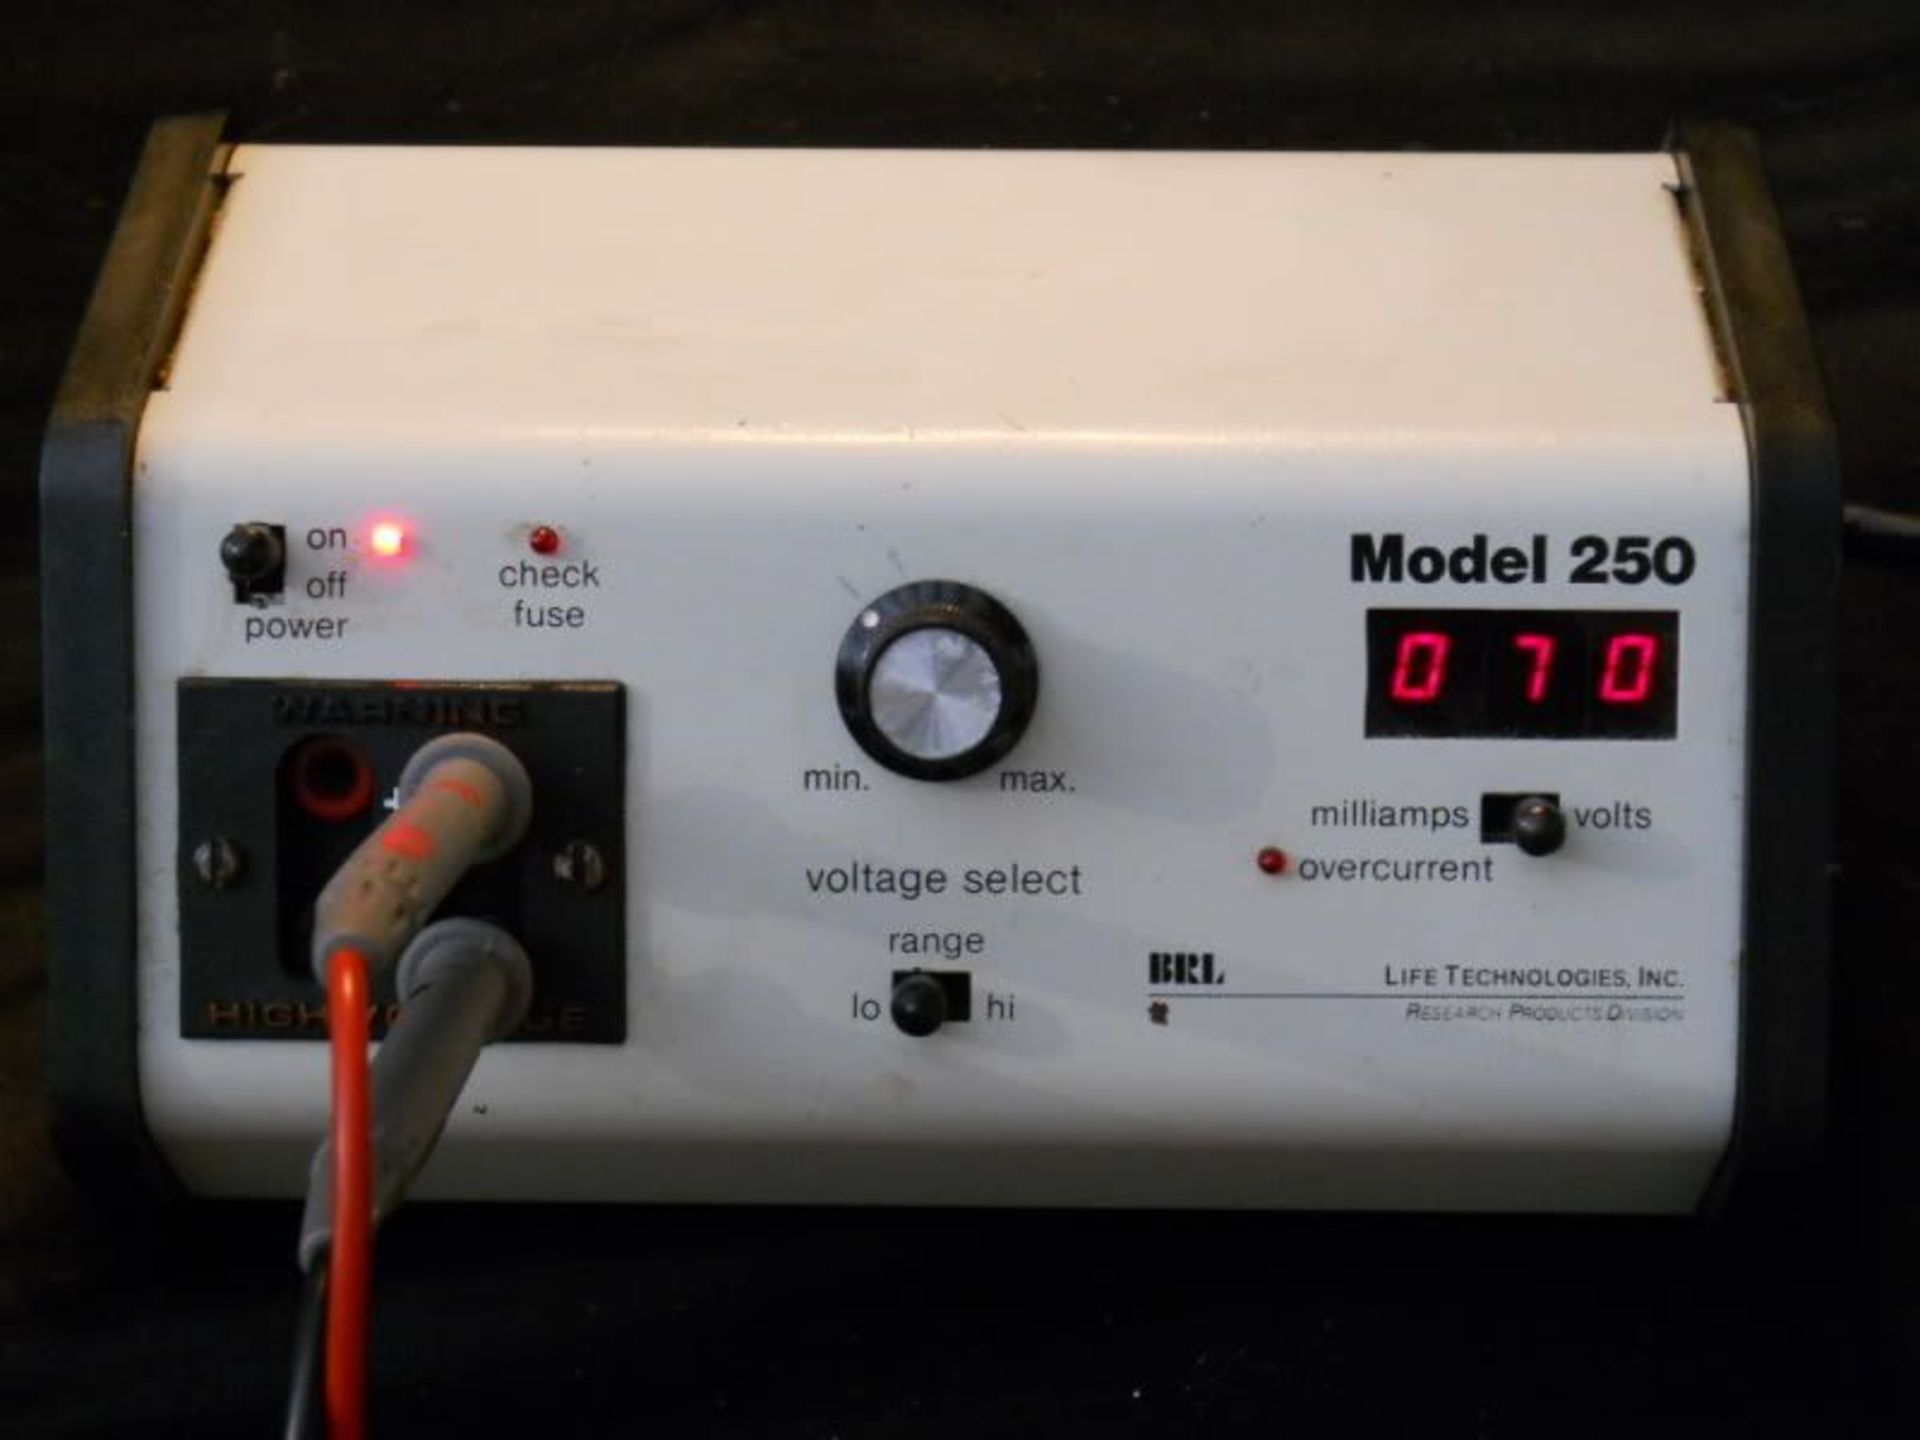 Life Technologies Inc. Power Supply Model 250 Cat. No 1066, Qty 1, 330759579567 - Image 2 of 8